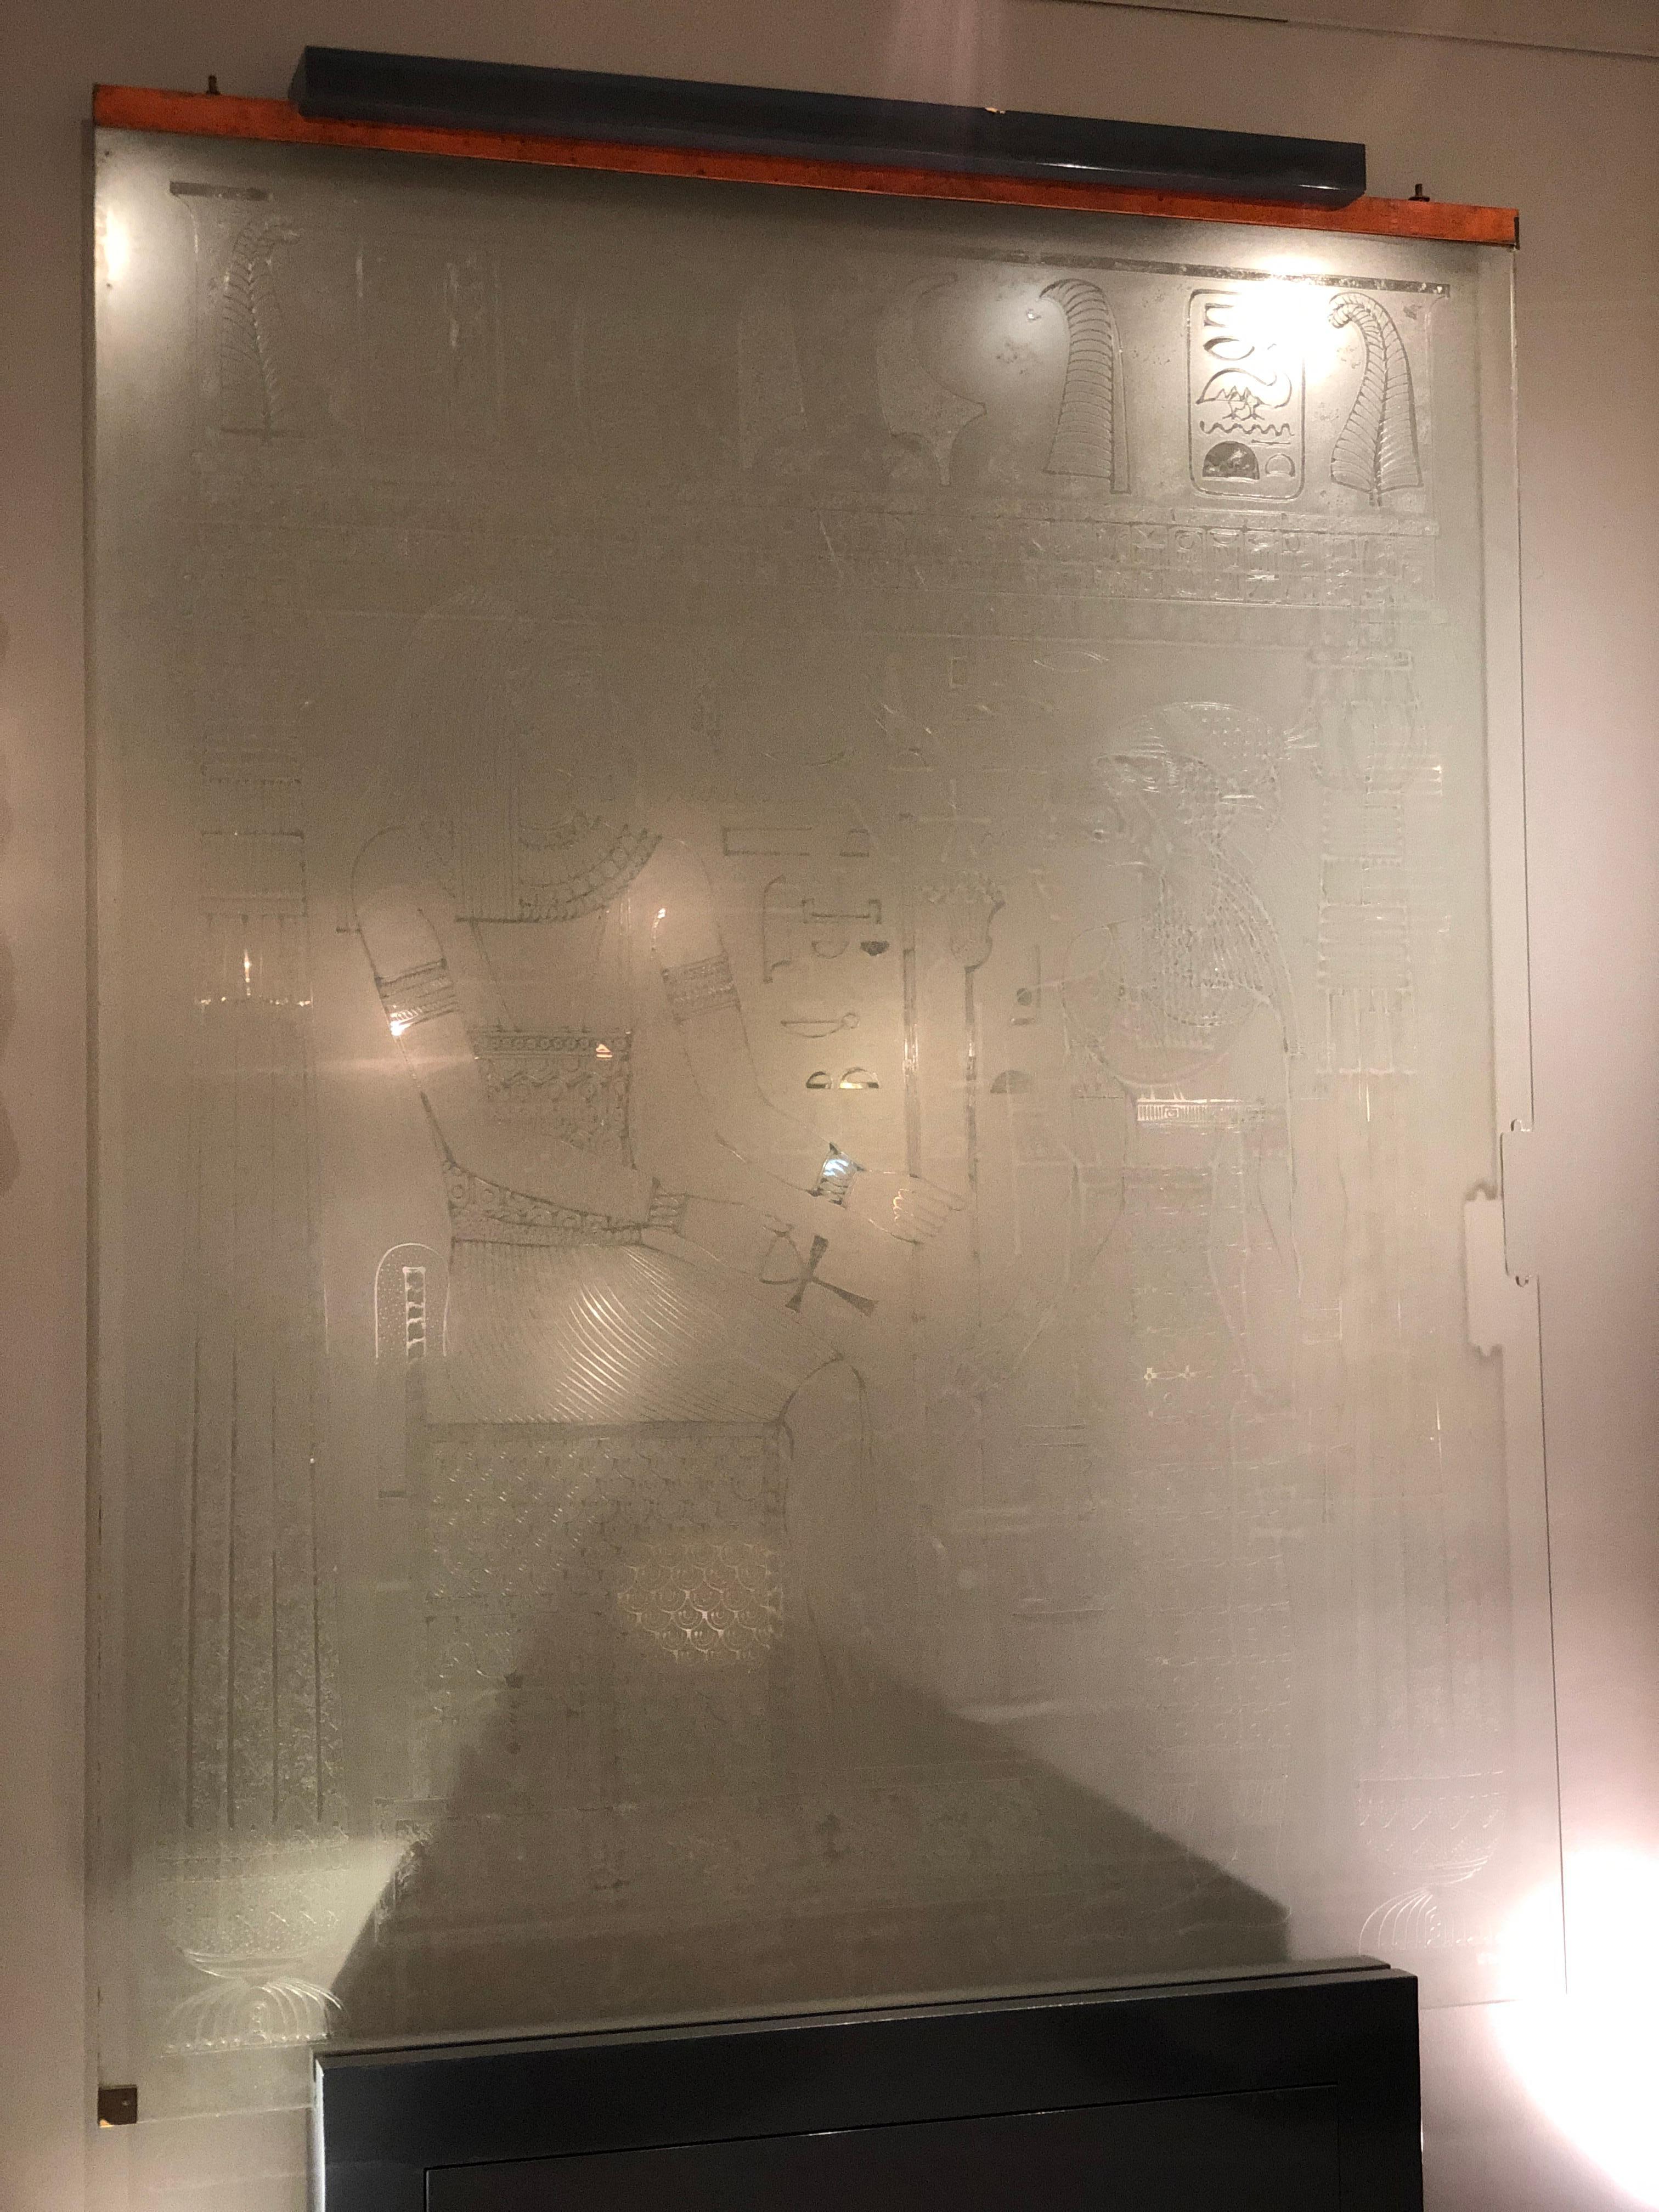 Etched glass, depicting a pharaoh and his queen surrounded by design motifs and hieroglyphics. Signed and dated in the glass. 

Originally used as a free hanging, sliding door.